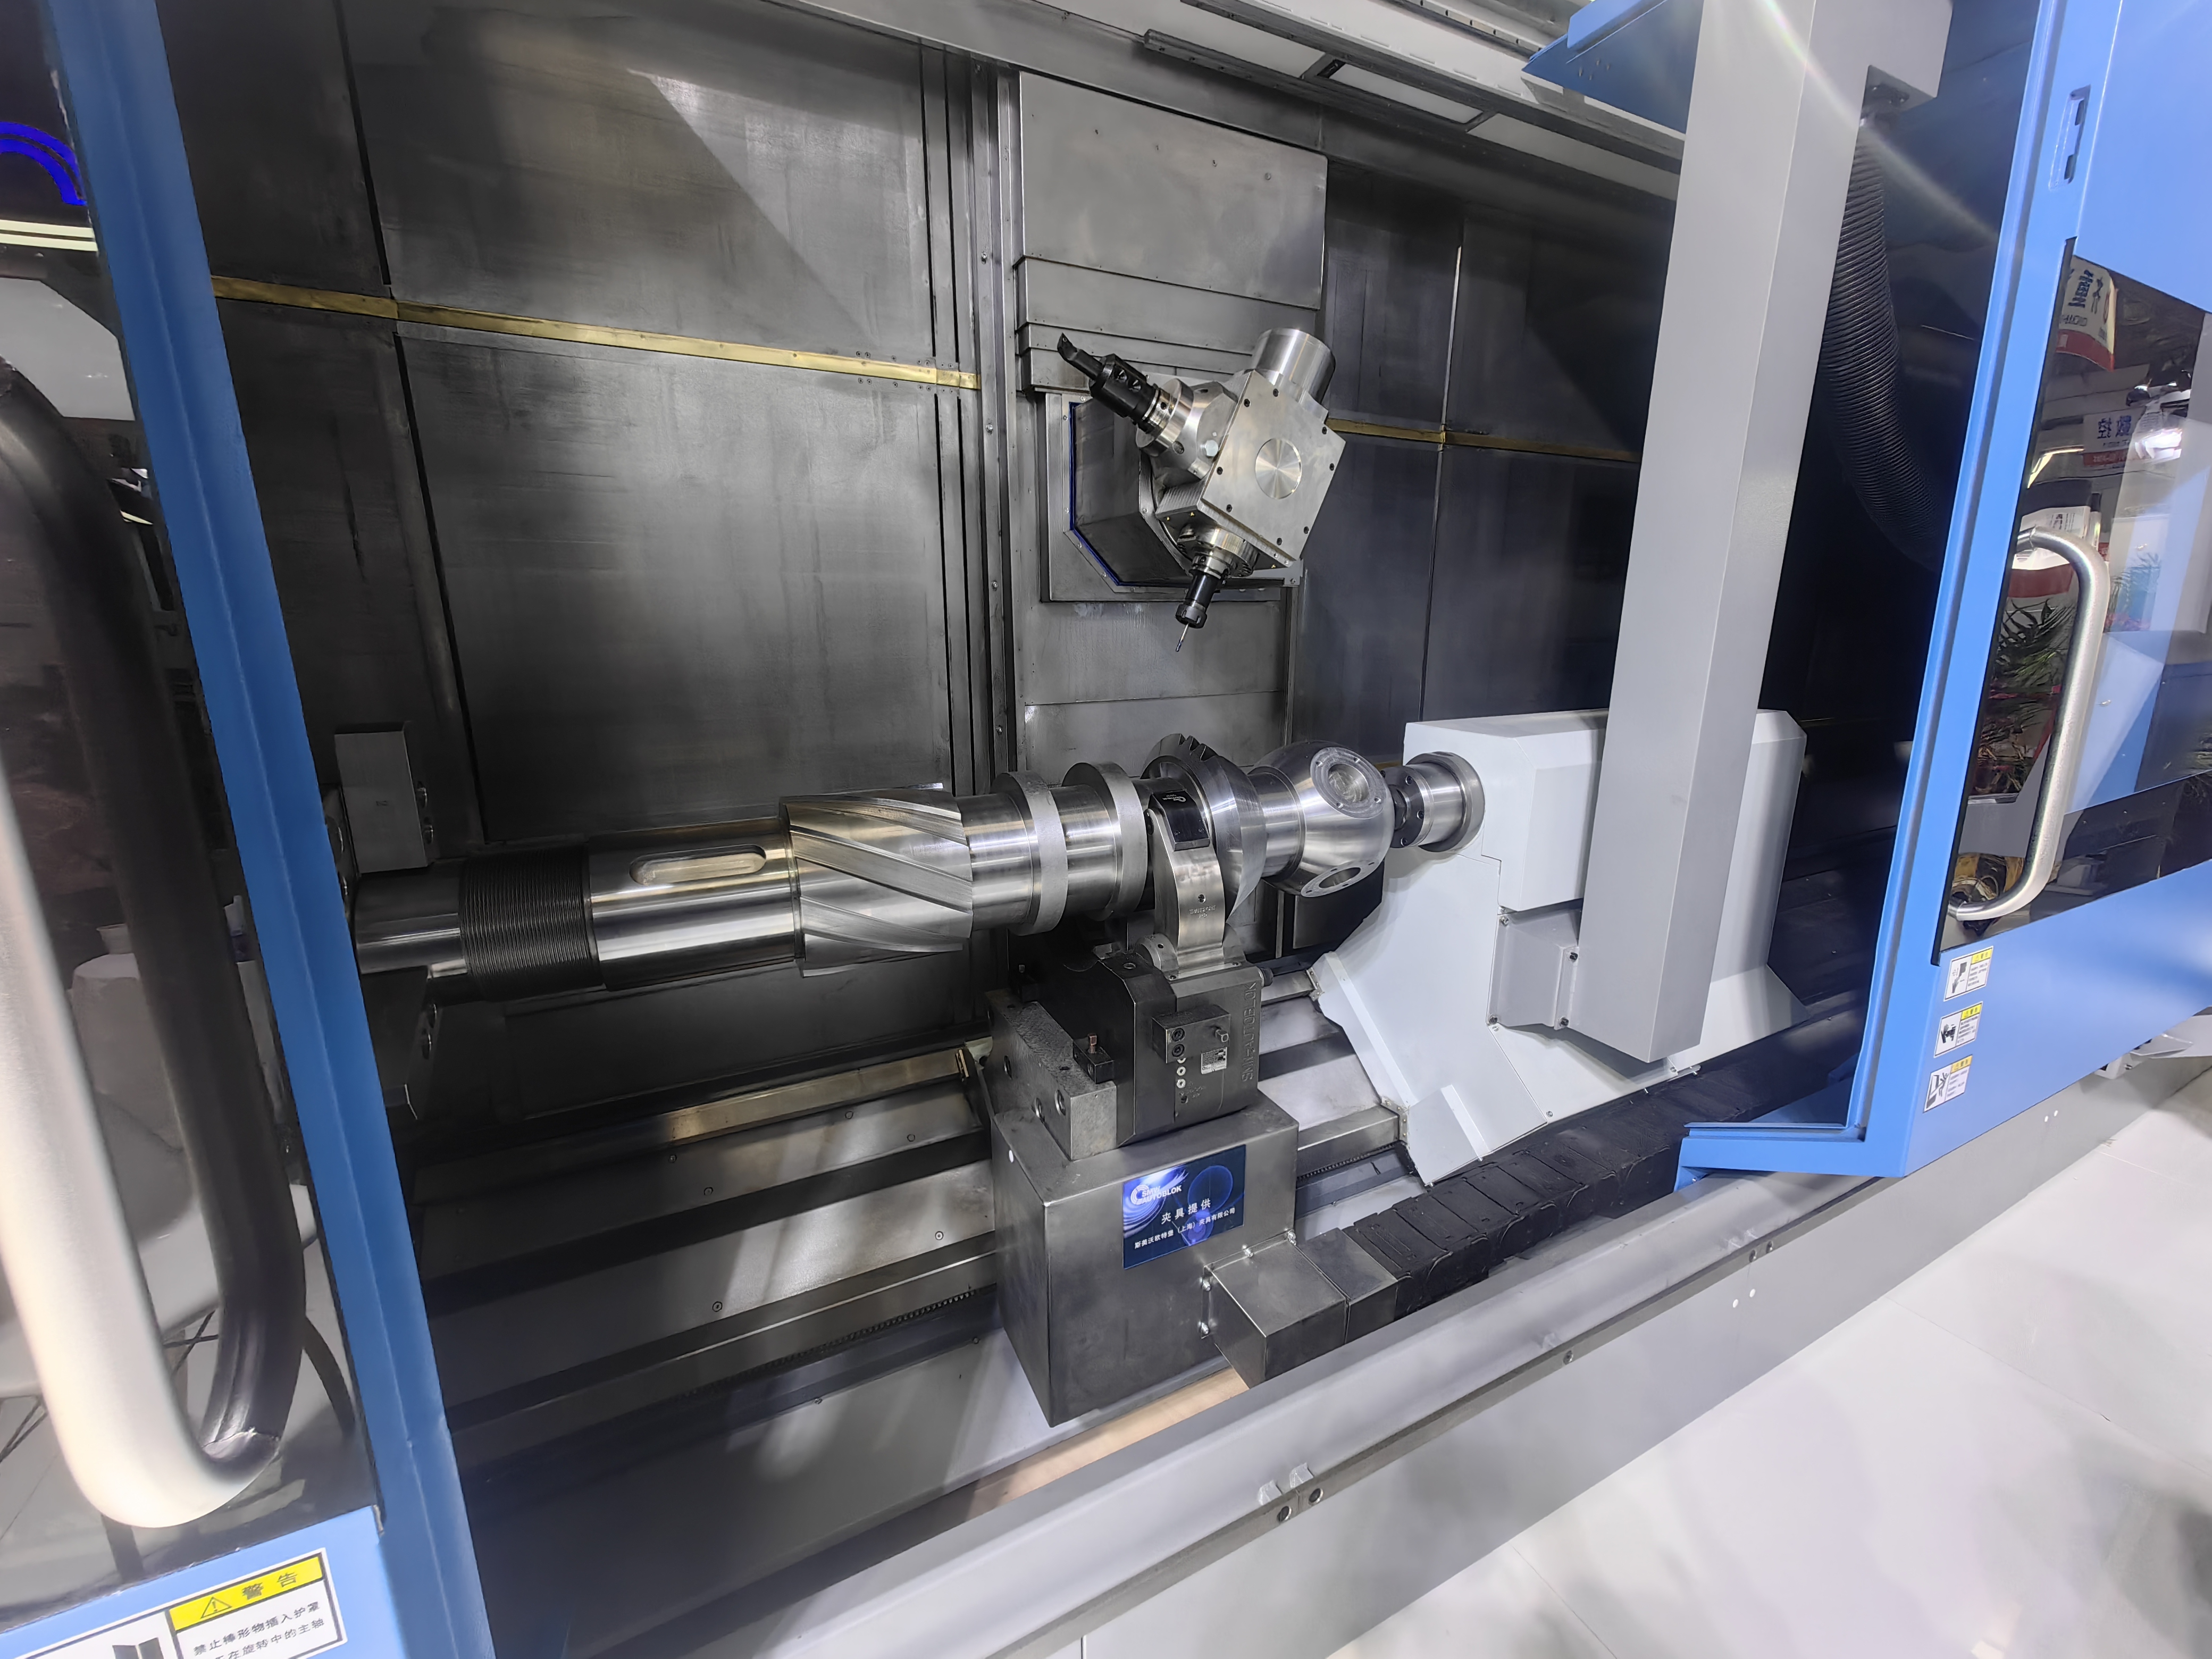 The working principle and technical advantages of 5-axis machining centres